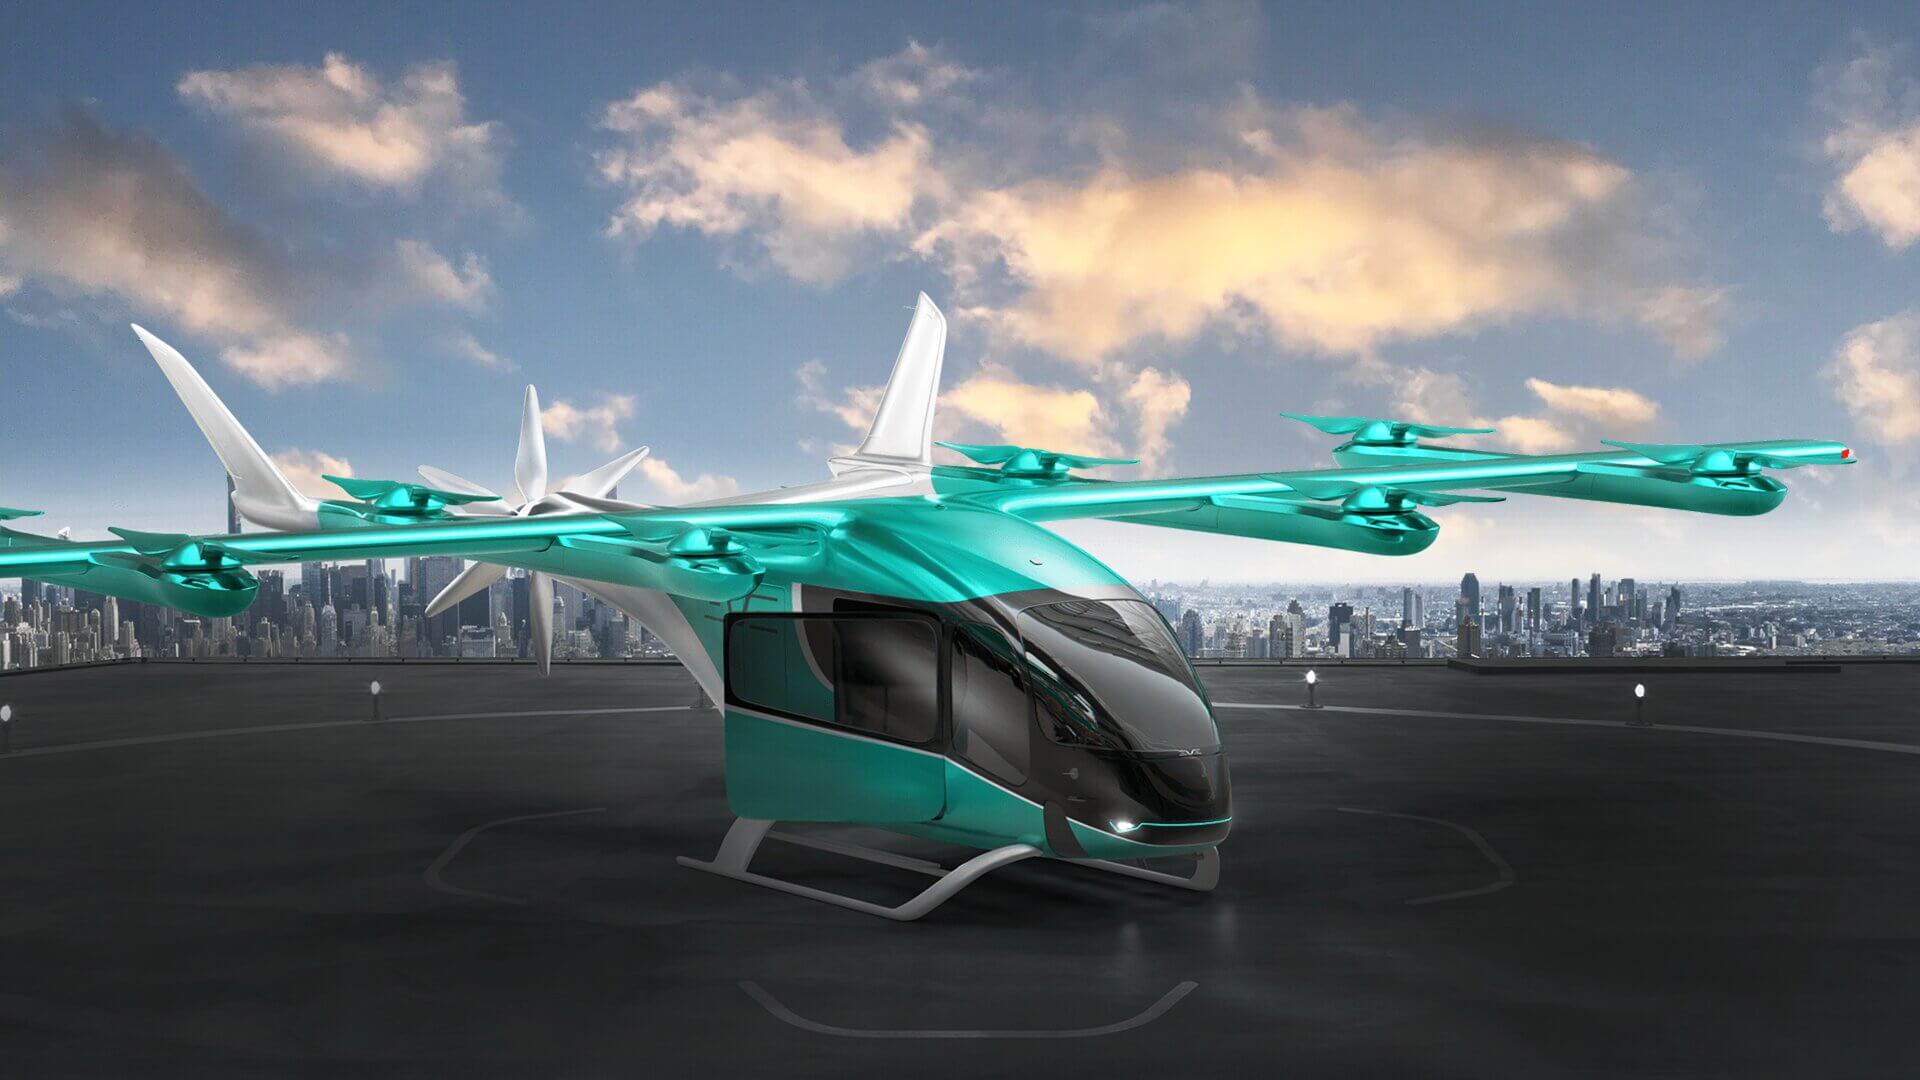 Eve Air MobilityとSkyScapeが日本初の都市ATM契約を発表